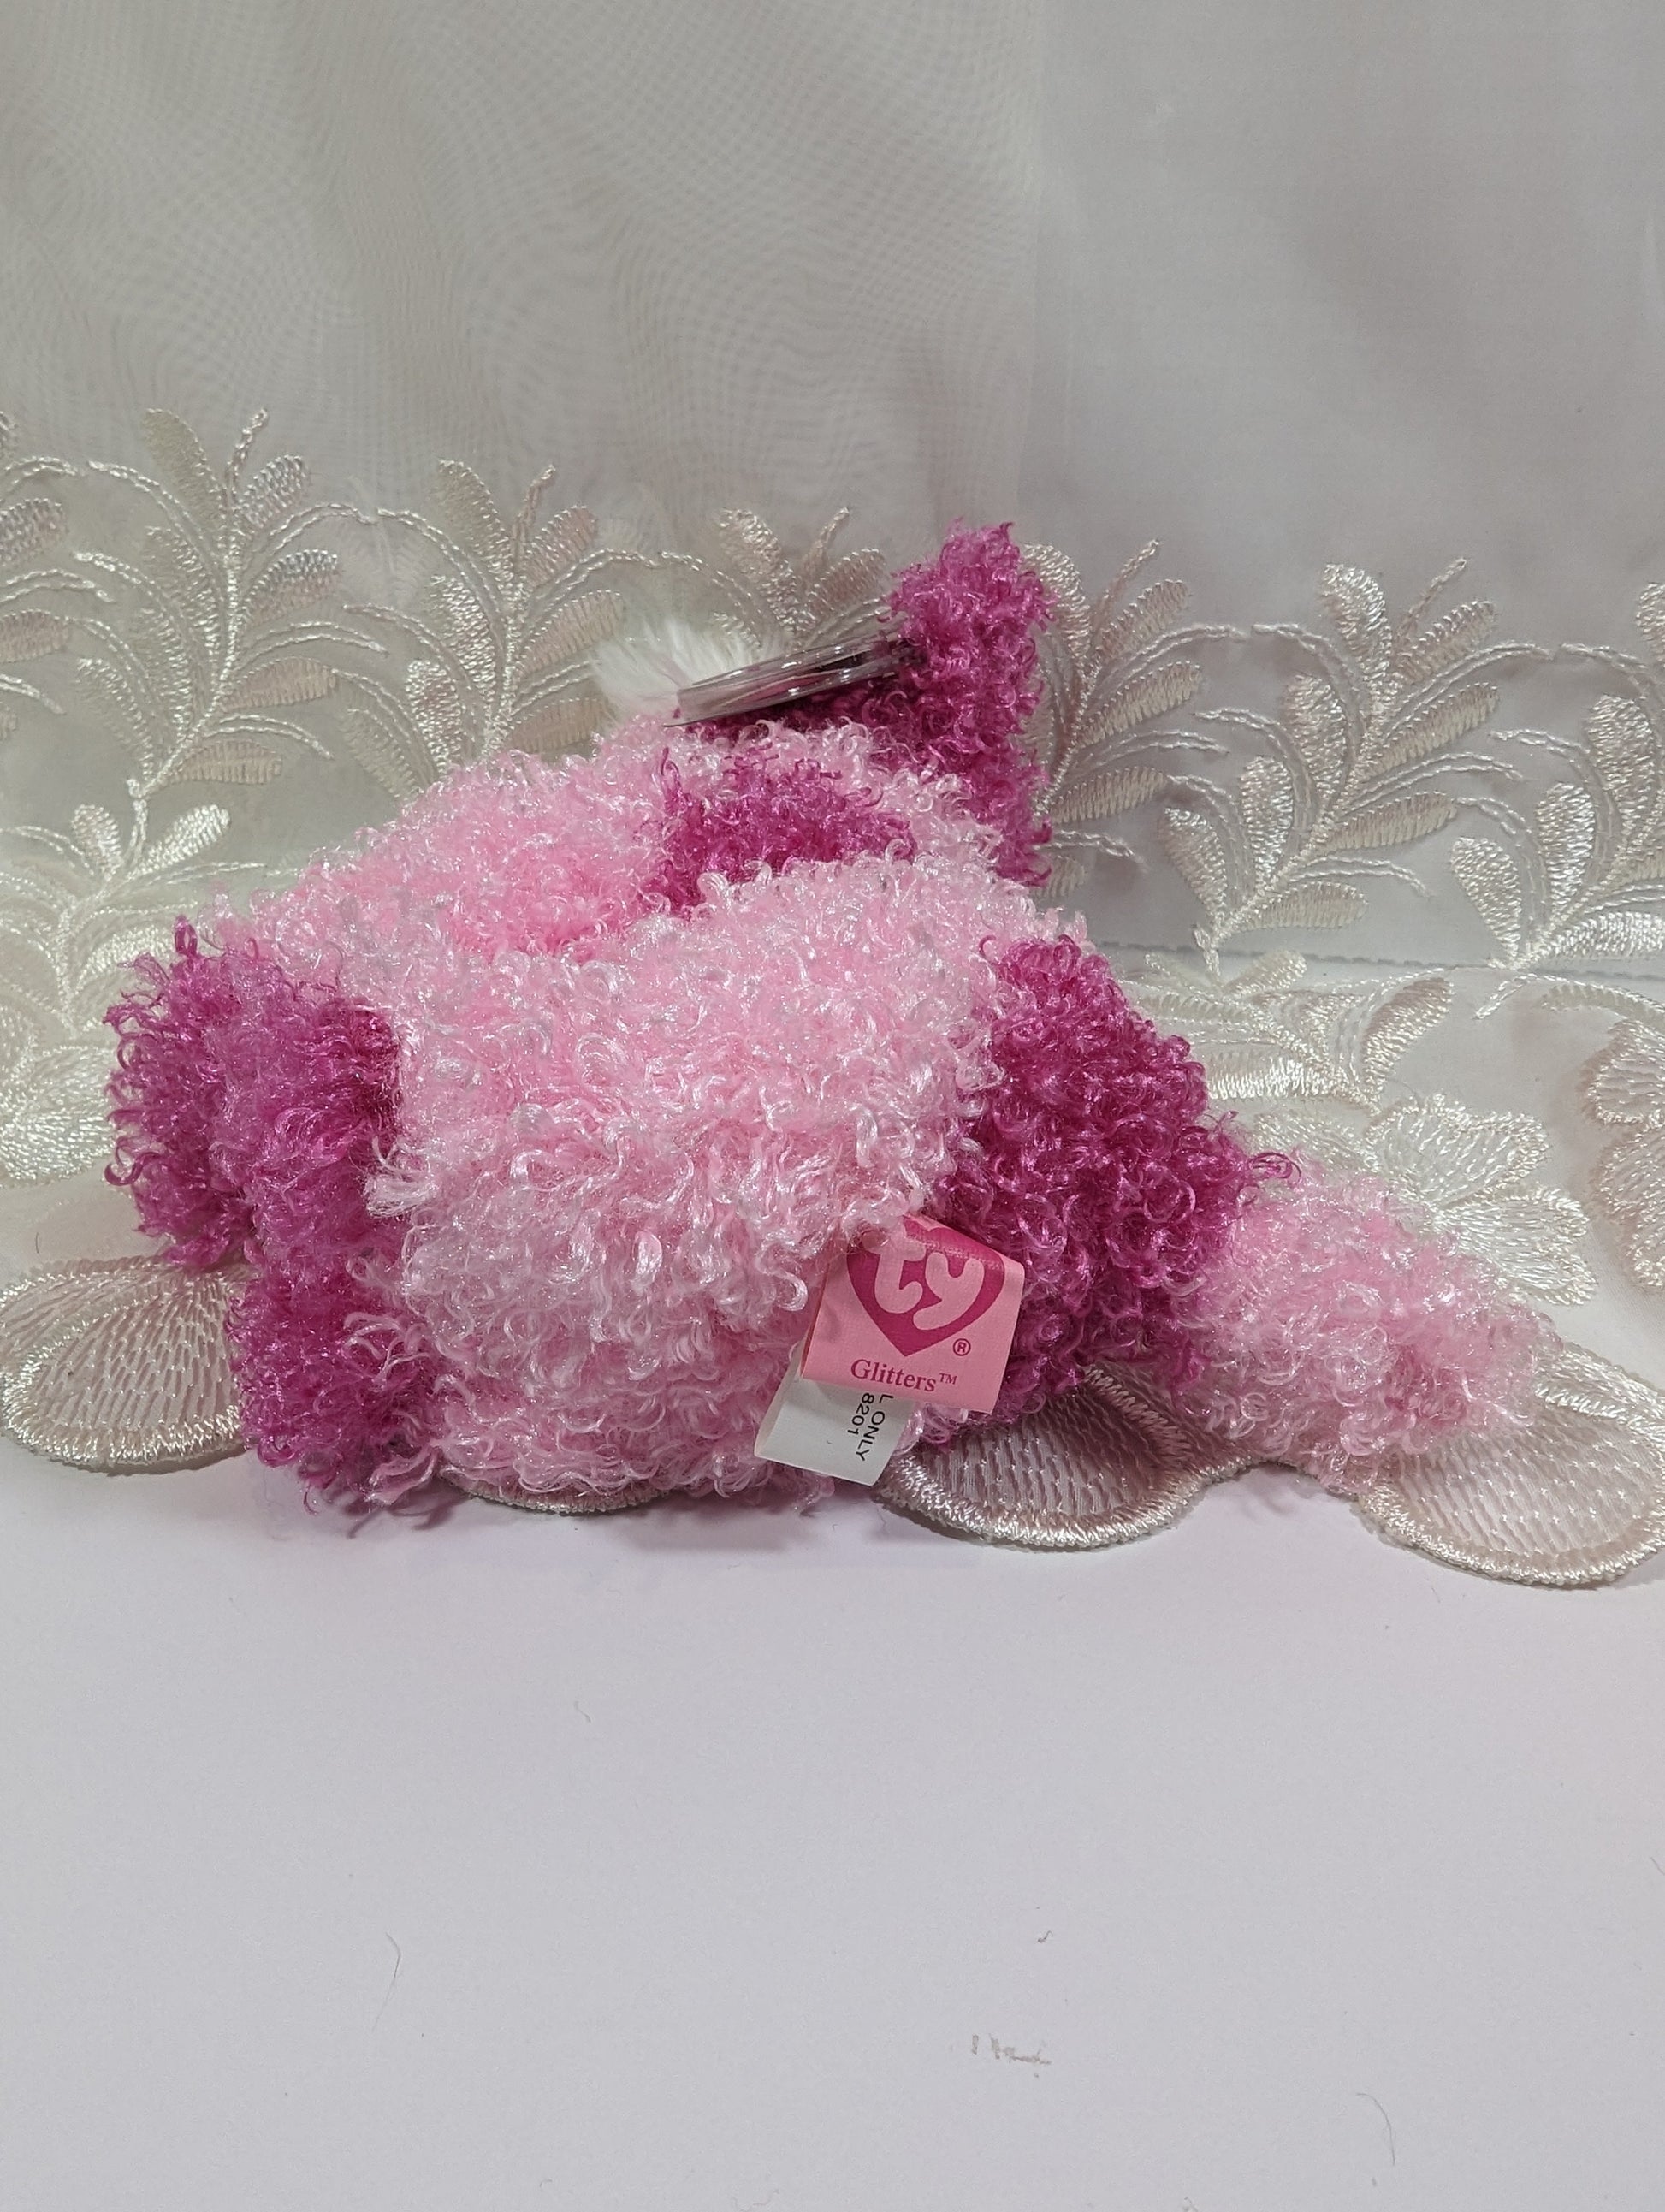 Ty Pinkys Collection - Glitters The Pink Dog (6.5in) - Vintage Beanies Canada